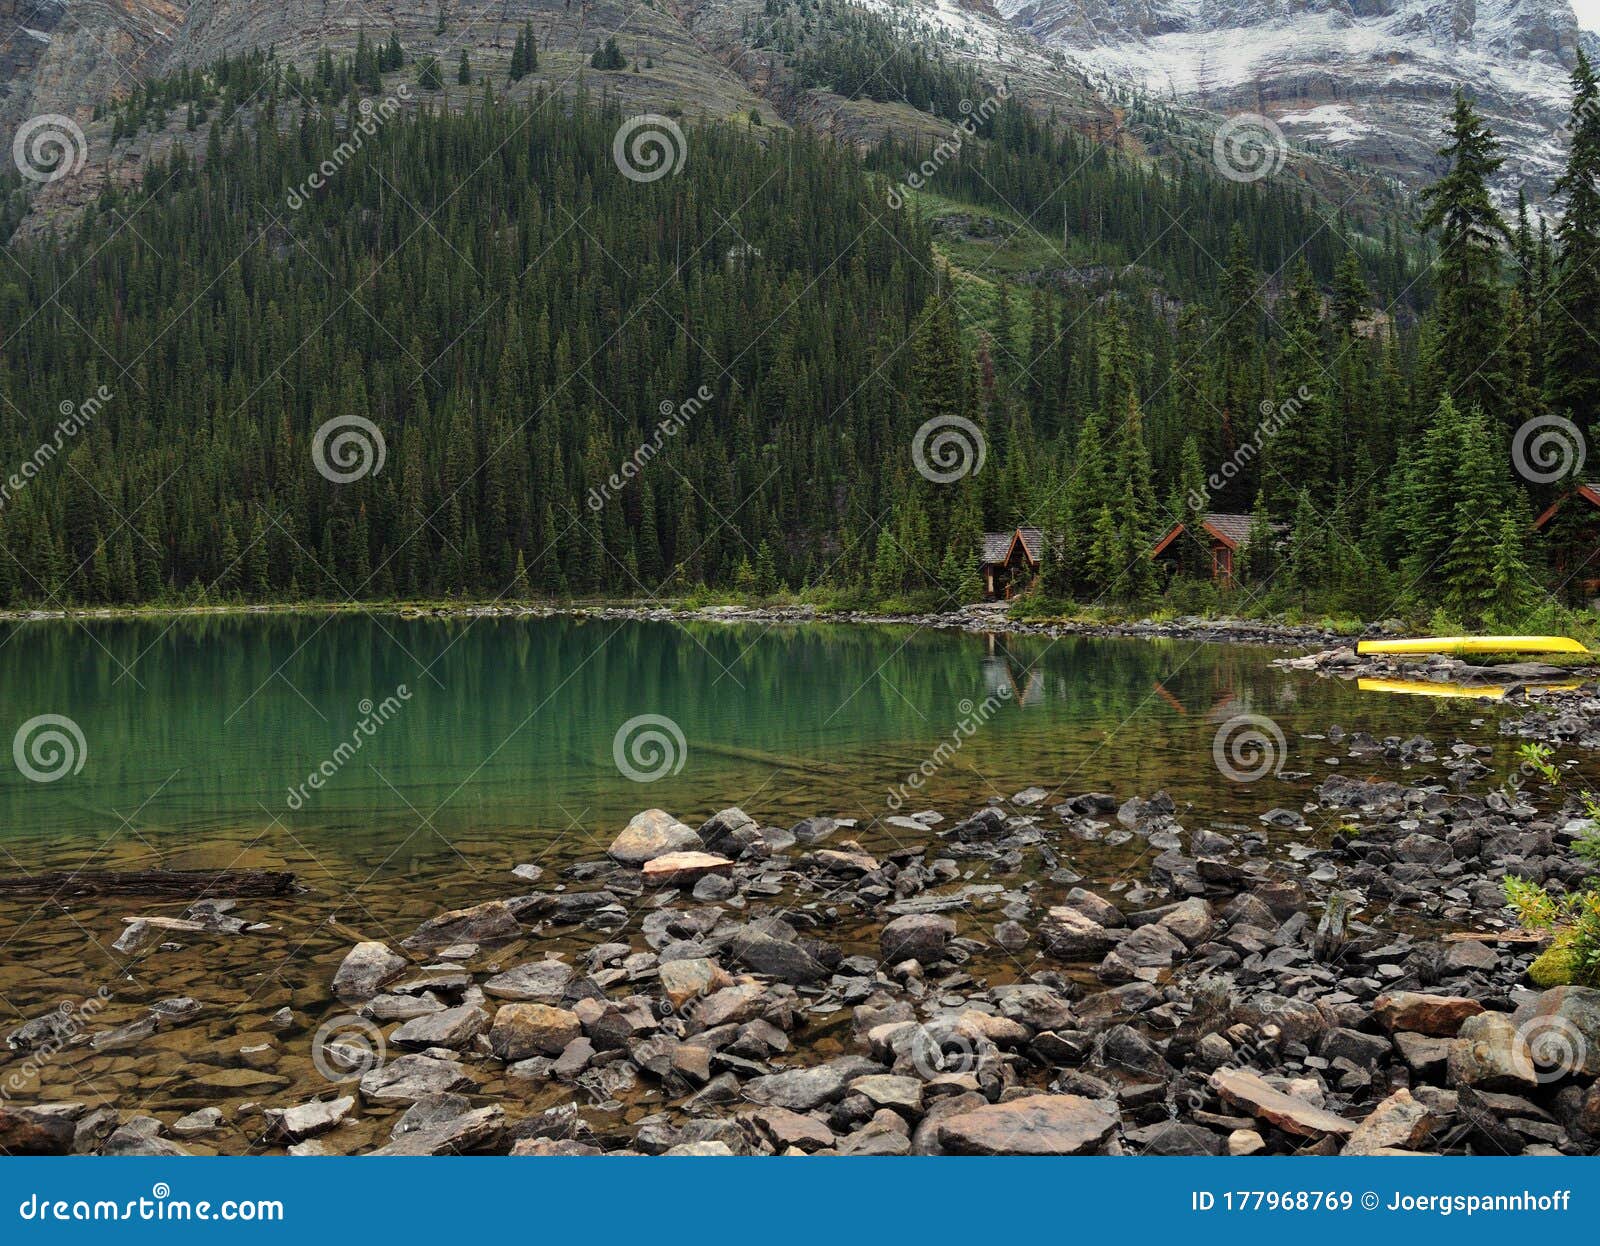 solitude and tranquillity in the wilderness of lake o`hara yoho national park